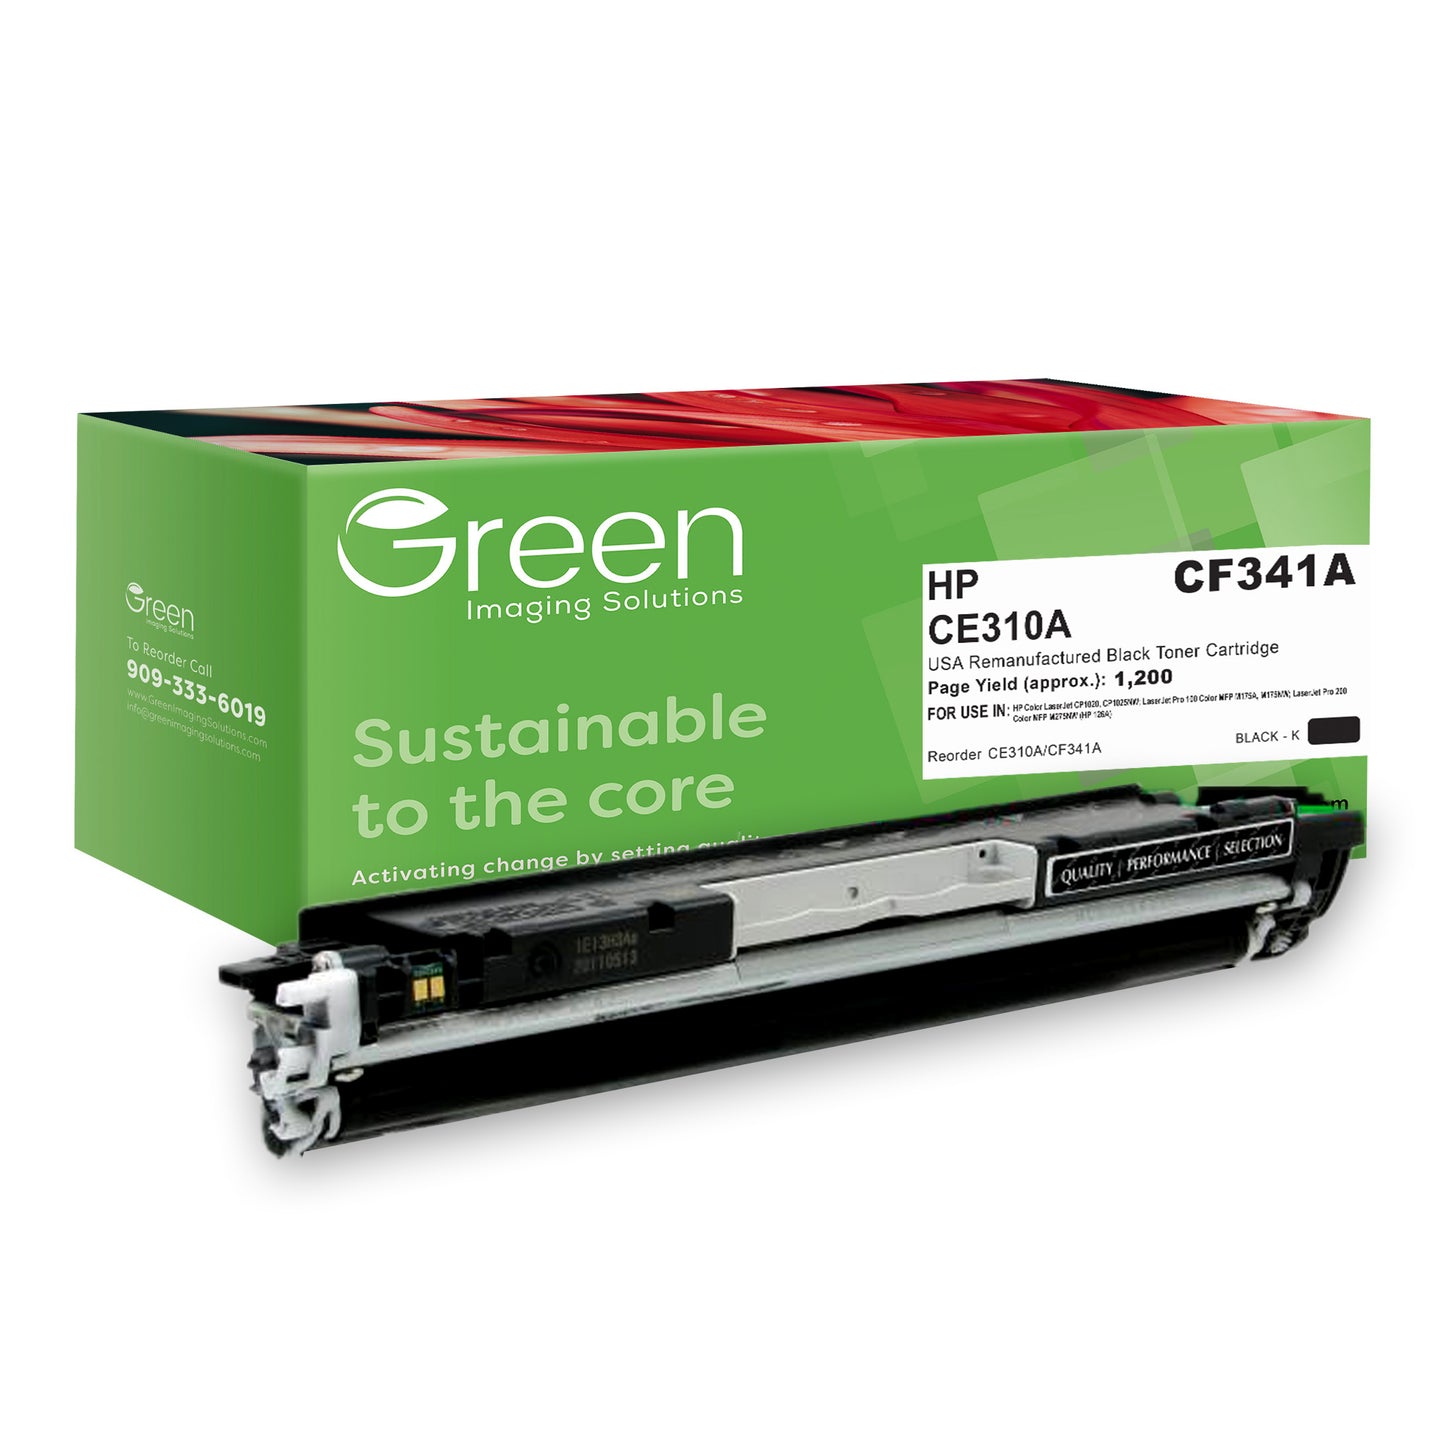 GIS USA Remanufactured Black Toner Cartridge for HP CE310A (HP 126A)